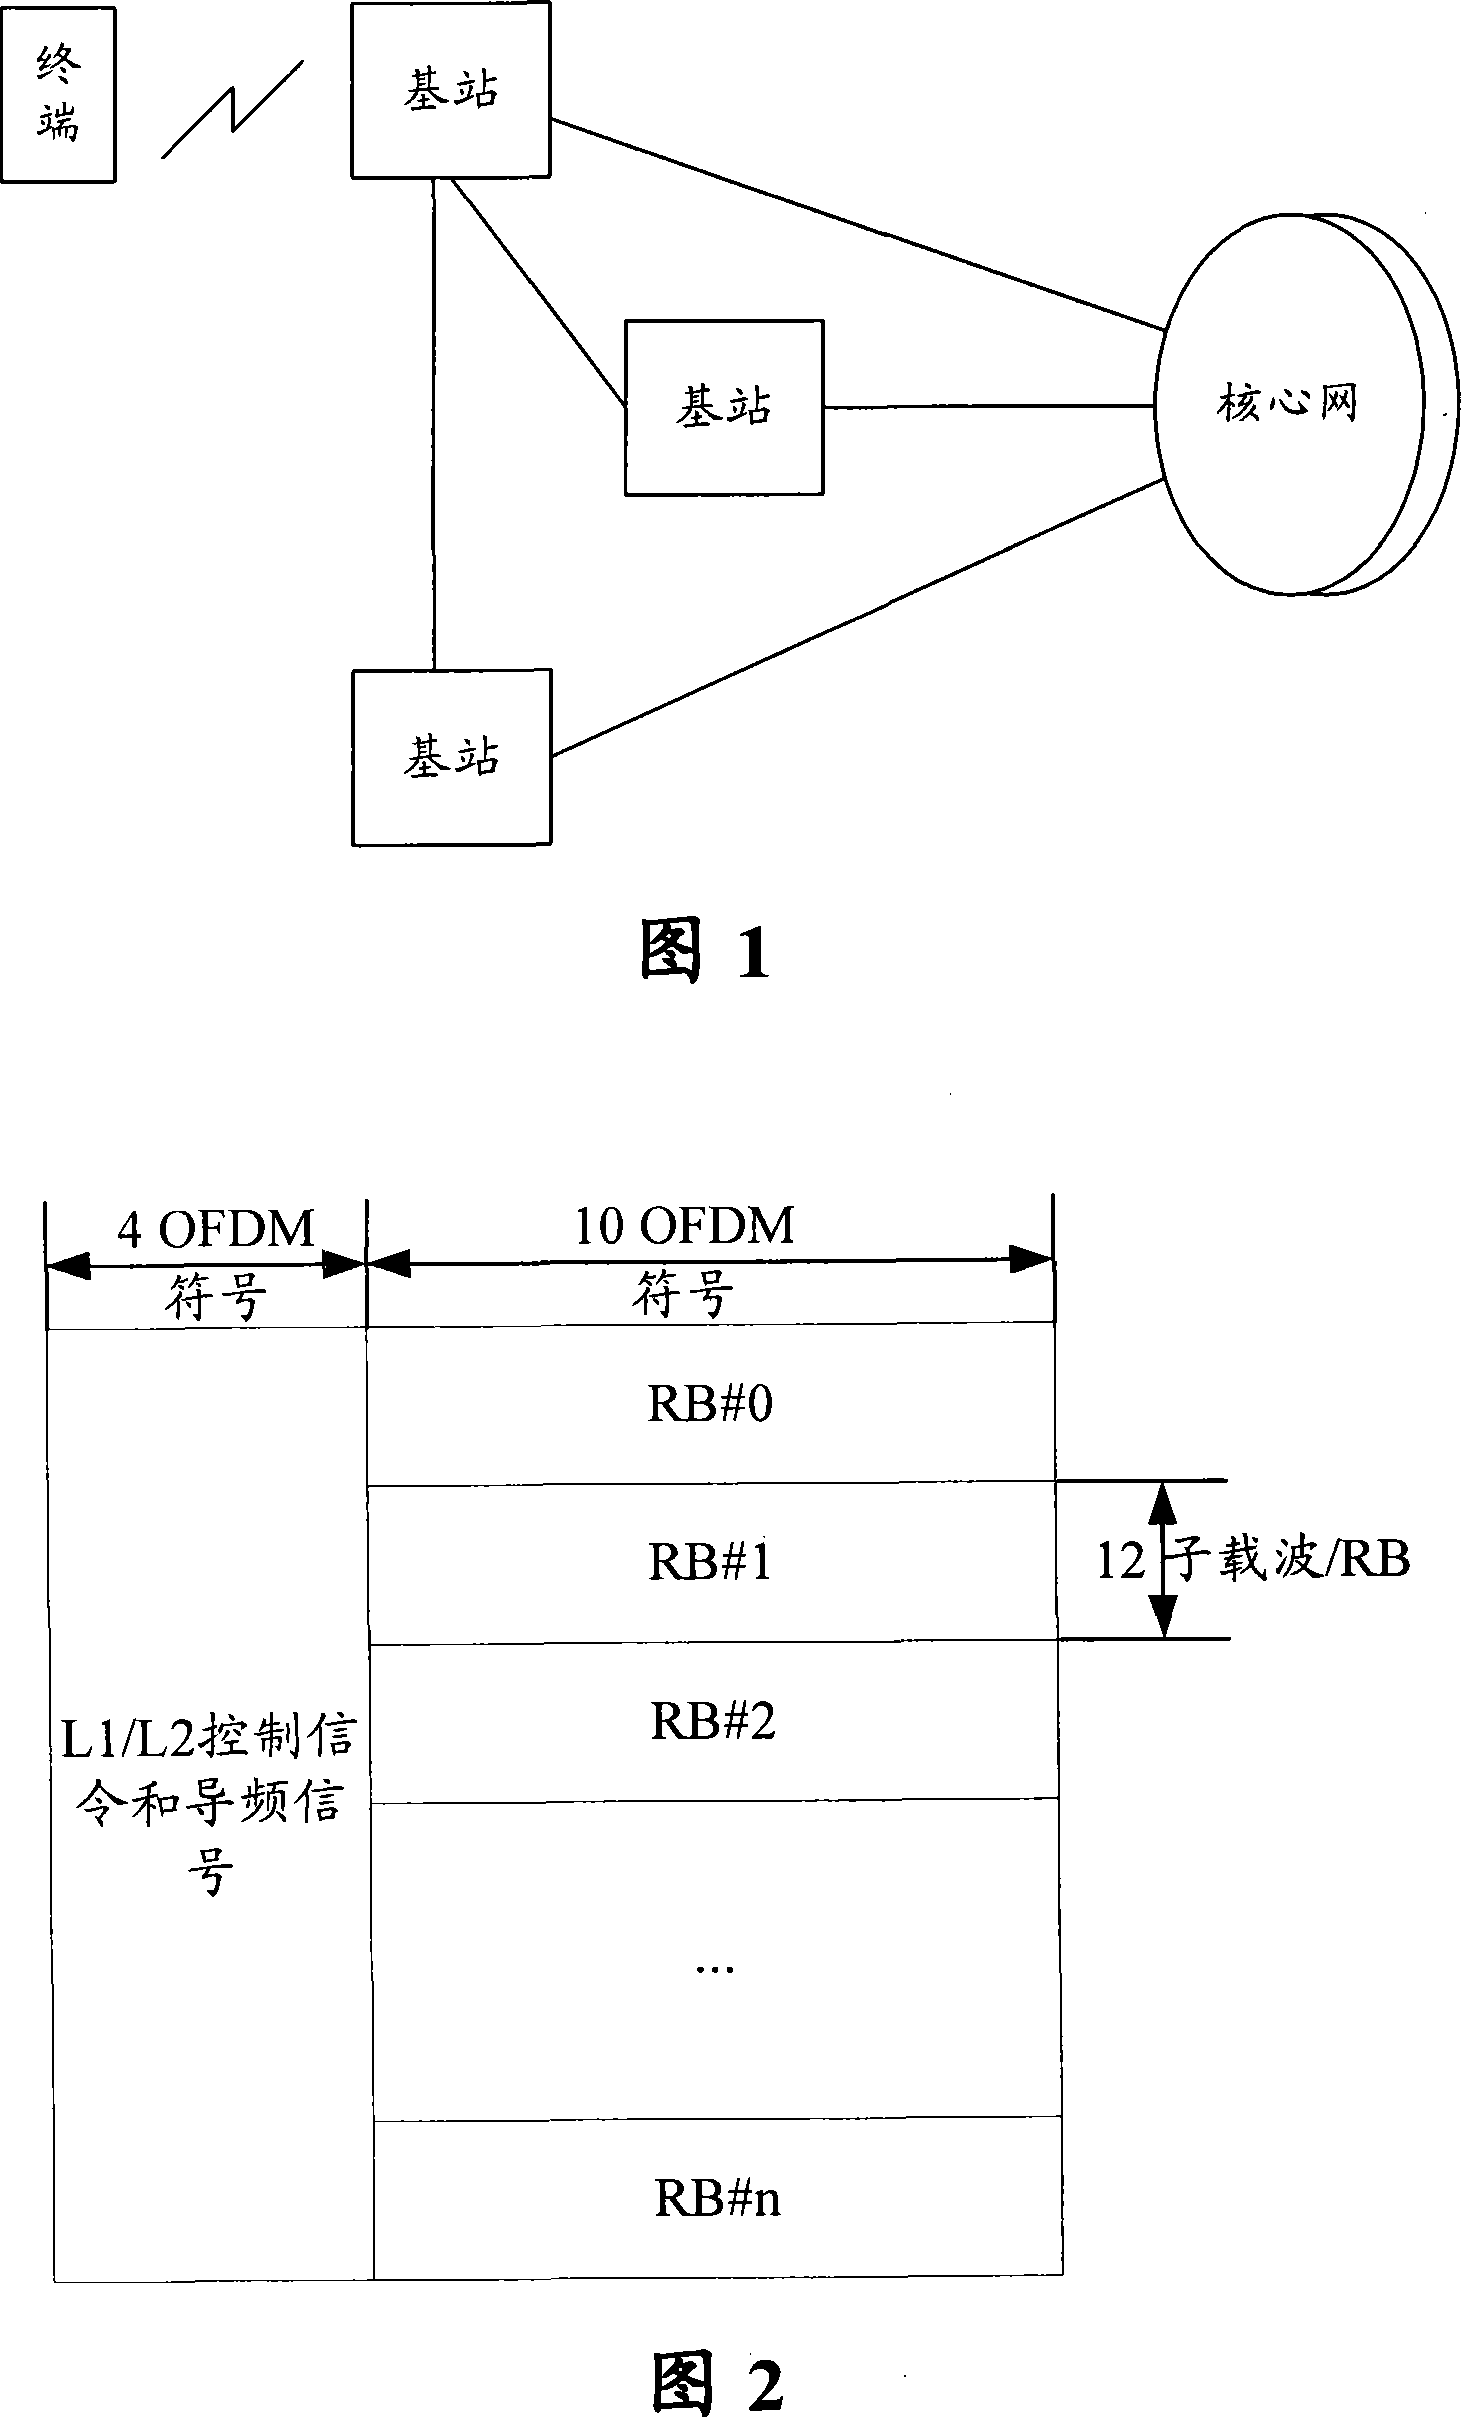 Indication method for wireless resource allocation of LTE system